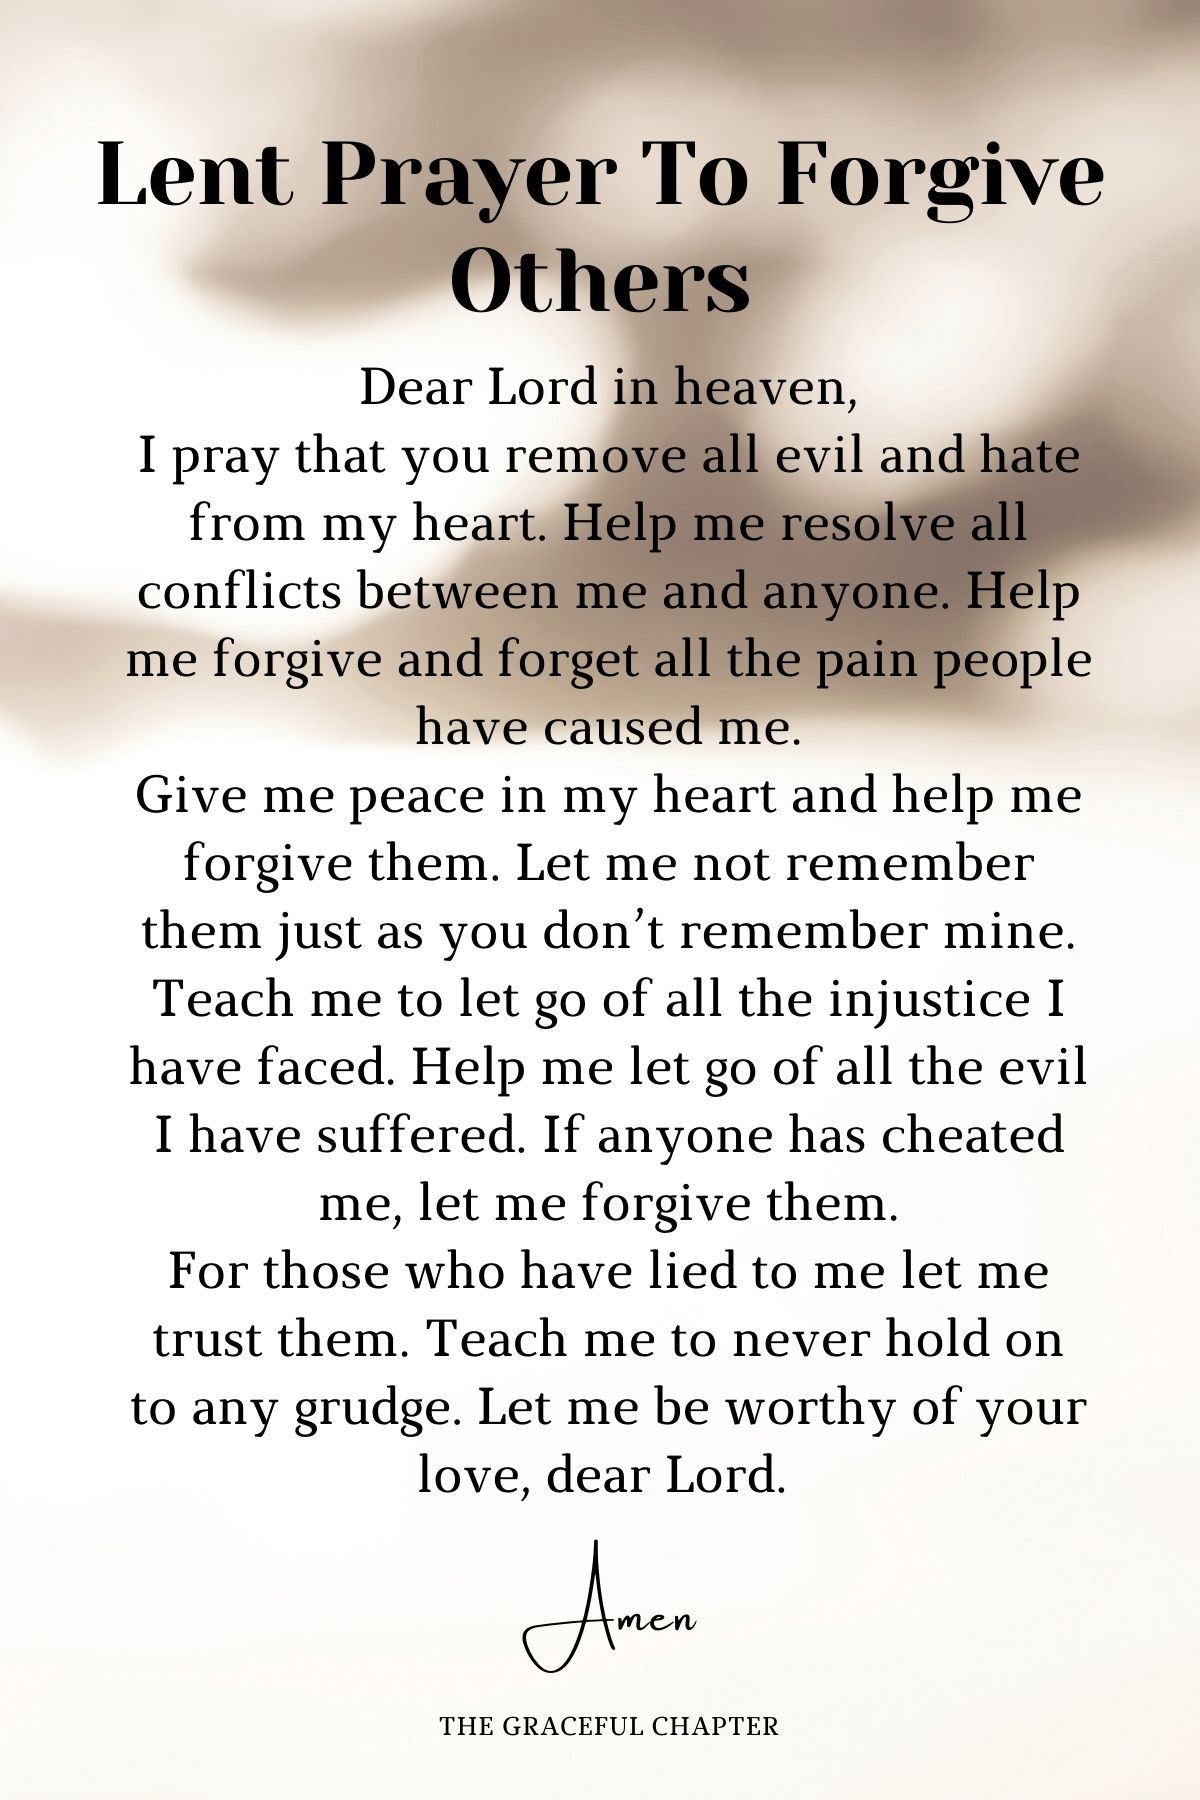 Lent prayer to forgive others